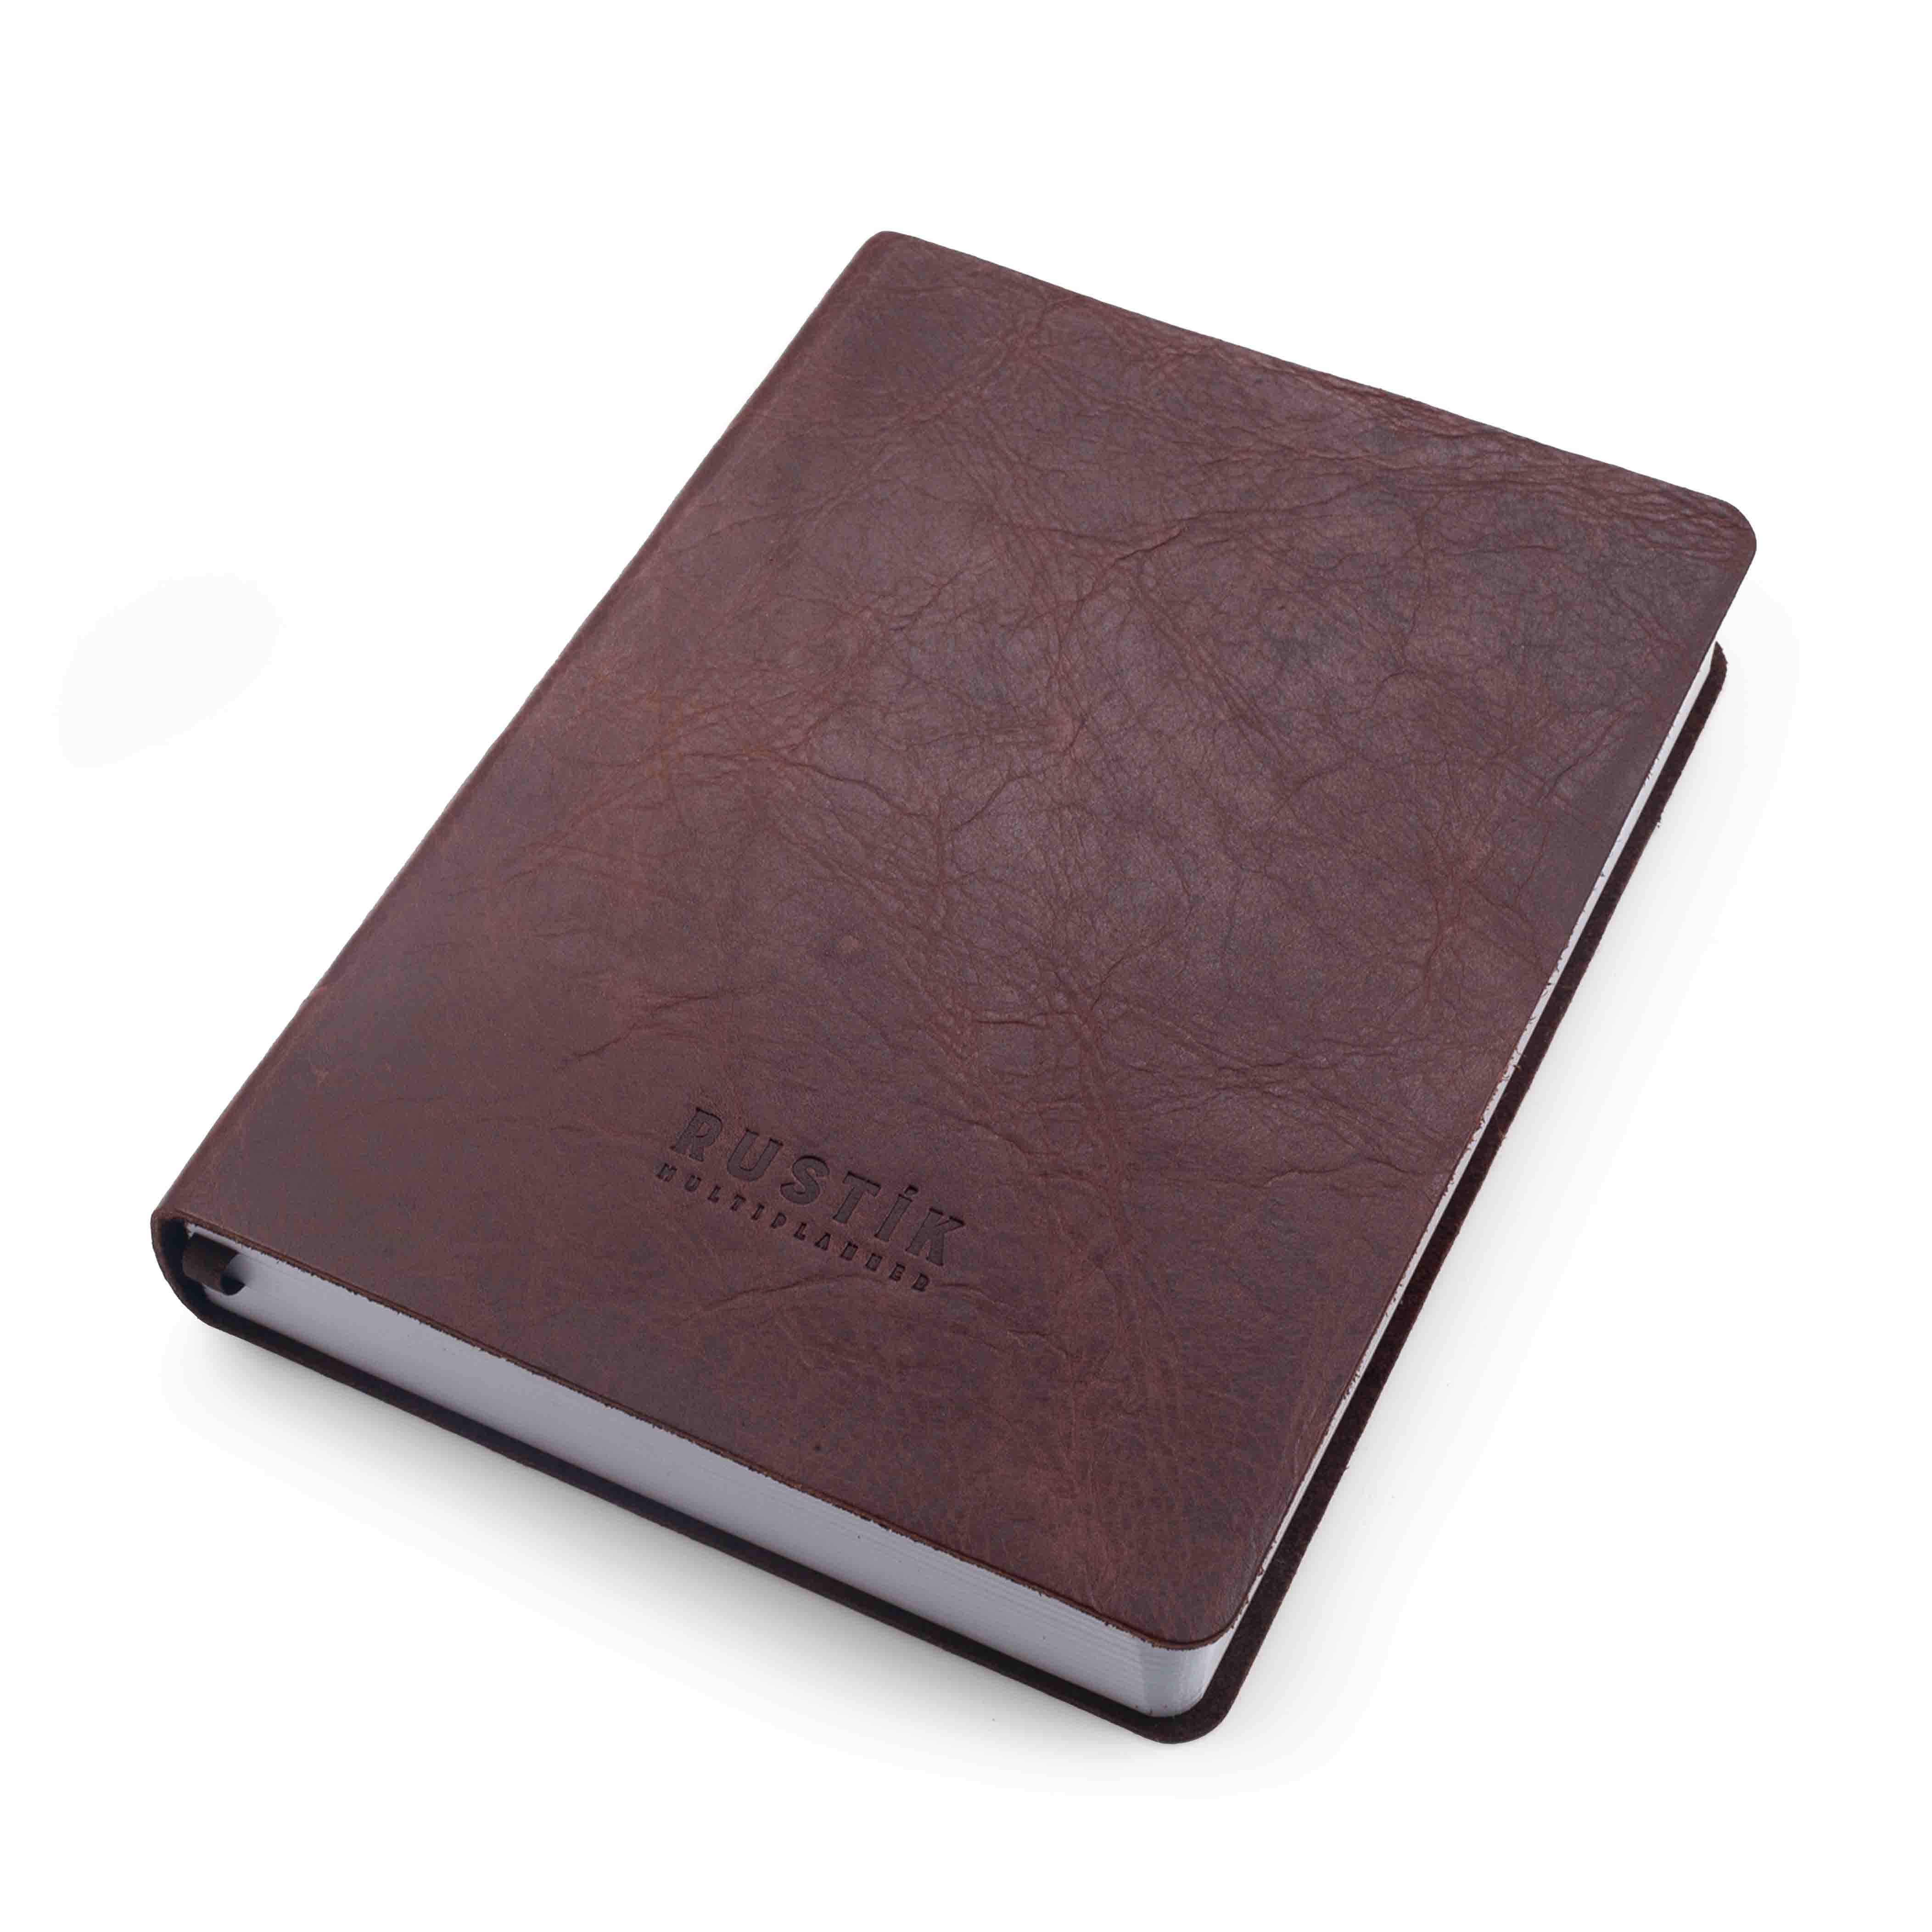 Image shows the top, front view of the Rustik Brown Leather MultiPlanner